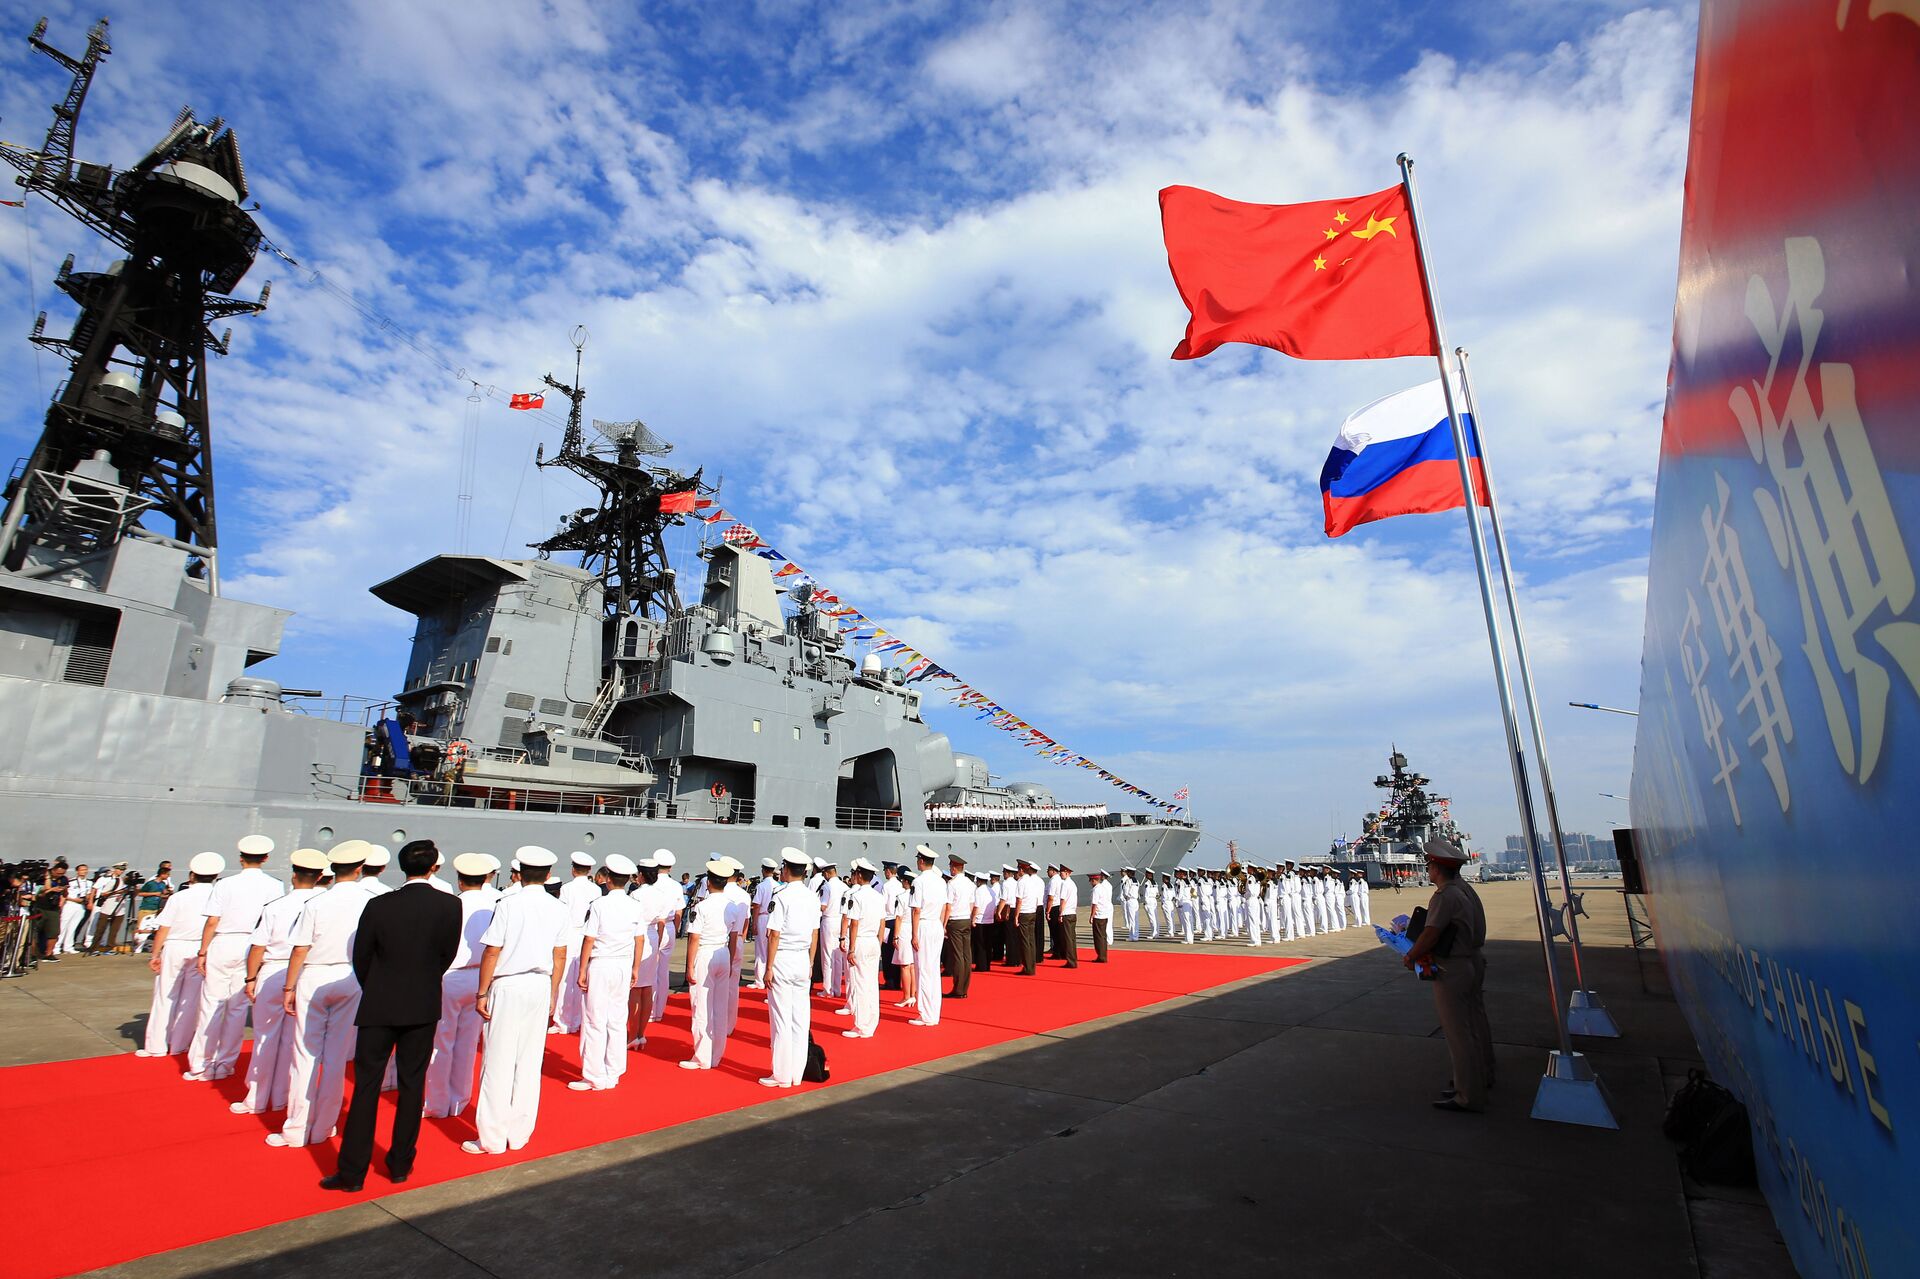 In this photo released by China's Xinhua News Agency, officers and soldiers of China's People's Liberation Army (PLA) Navy hold a welcome ceremony as a Russian naval ship arrives in port in Zhanjiang in southern China's Guangdong Province, Monday, Sept. 12, 2016 - Sputnik International, 1920, 23.12.2022